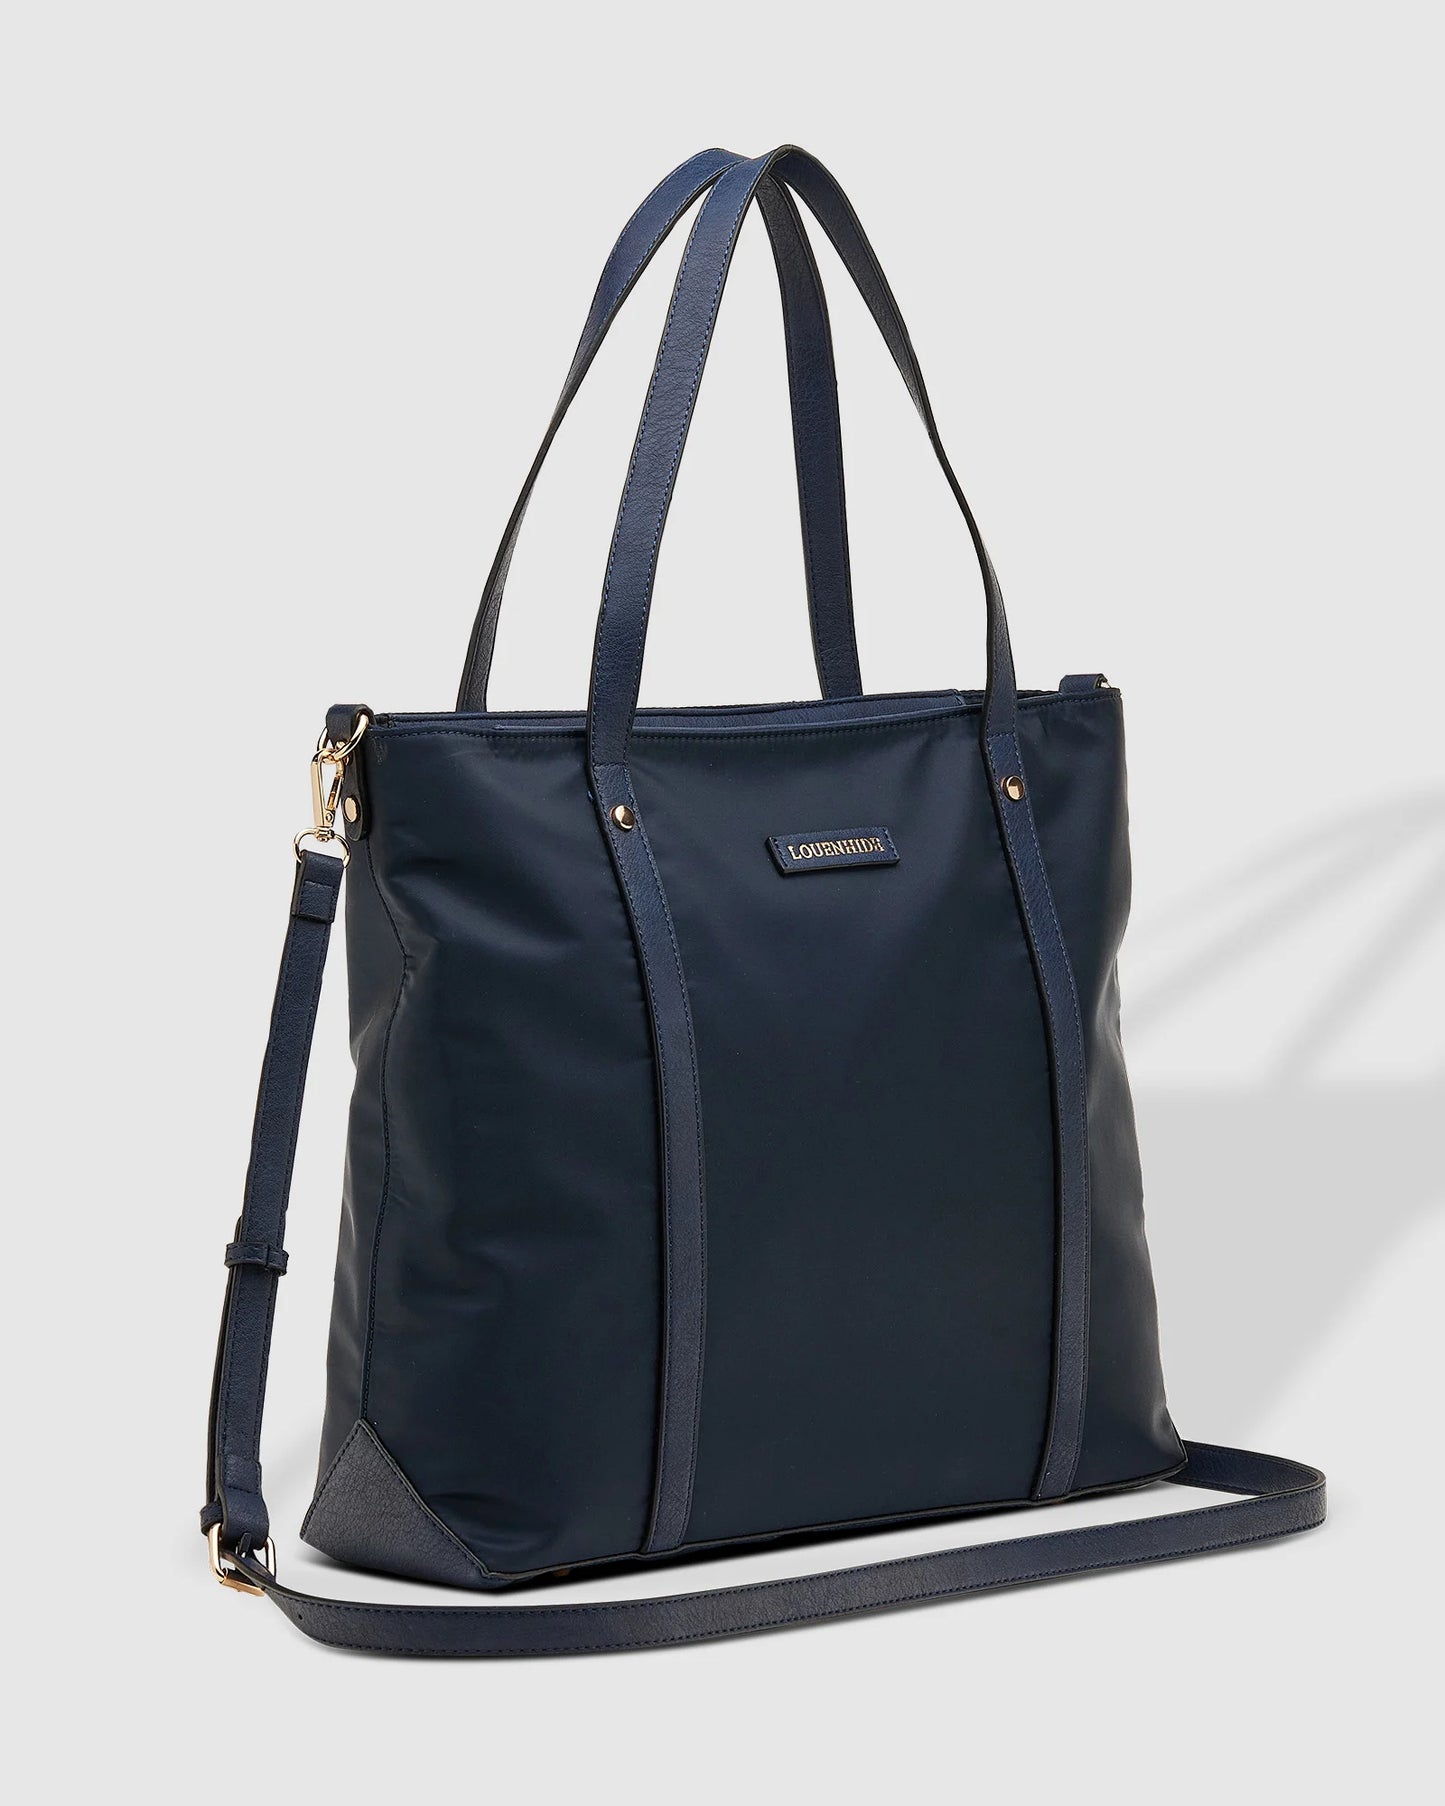 Nora Travel Tote in Navy